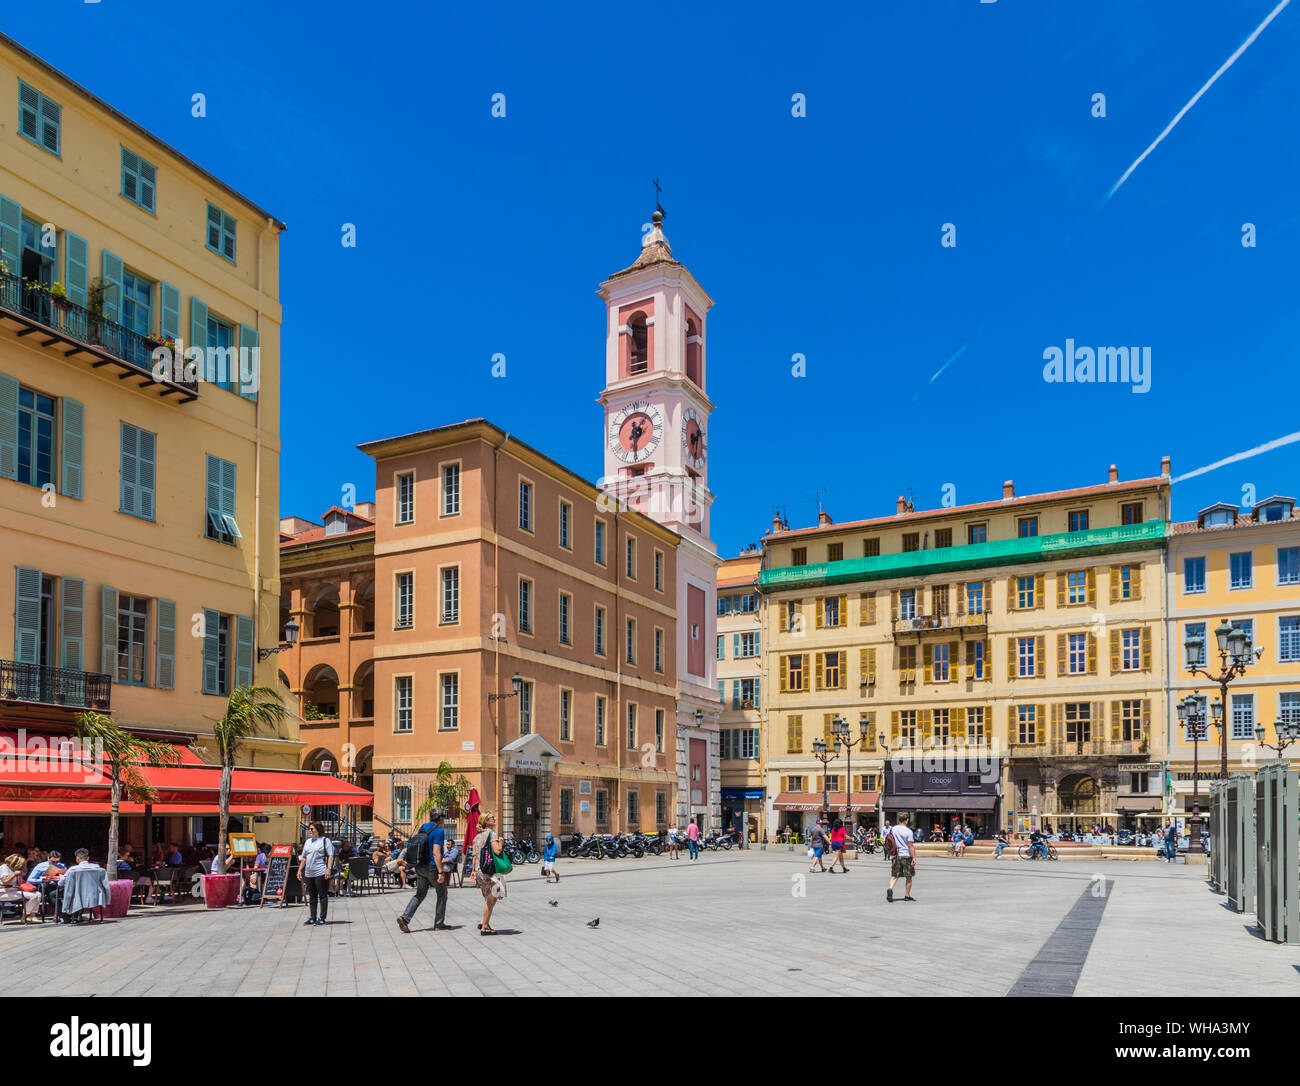 Palace of Justice Square in the Old Town, Nice, Alpes Maritimes, Cote d'Azur, French Riviera, Provence, France, Mediterranean, Europe Stock Photo